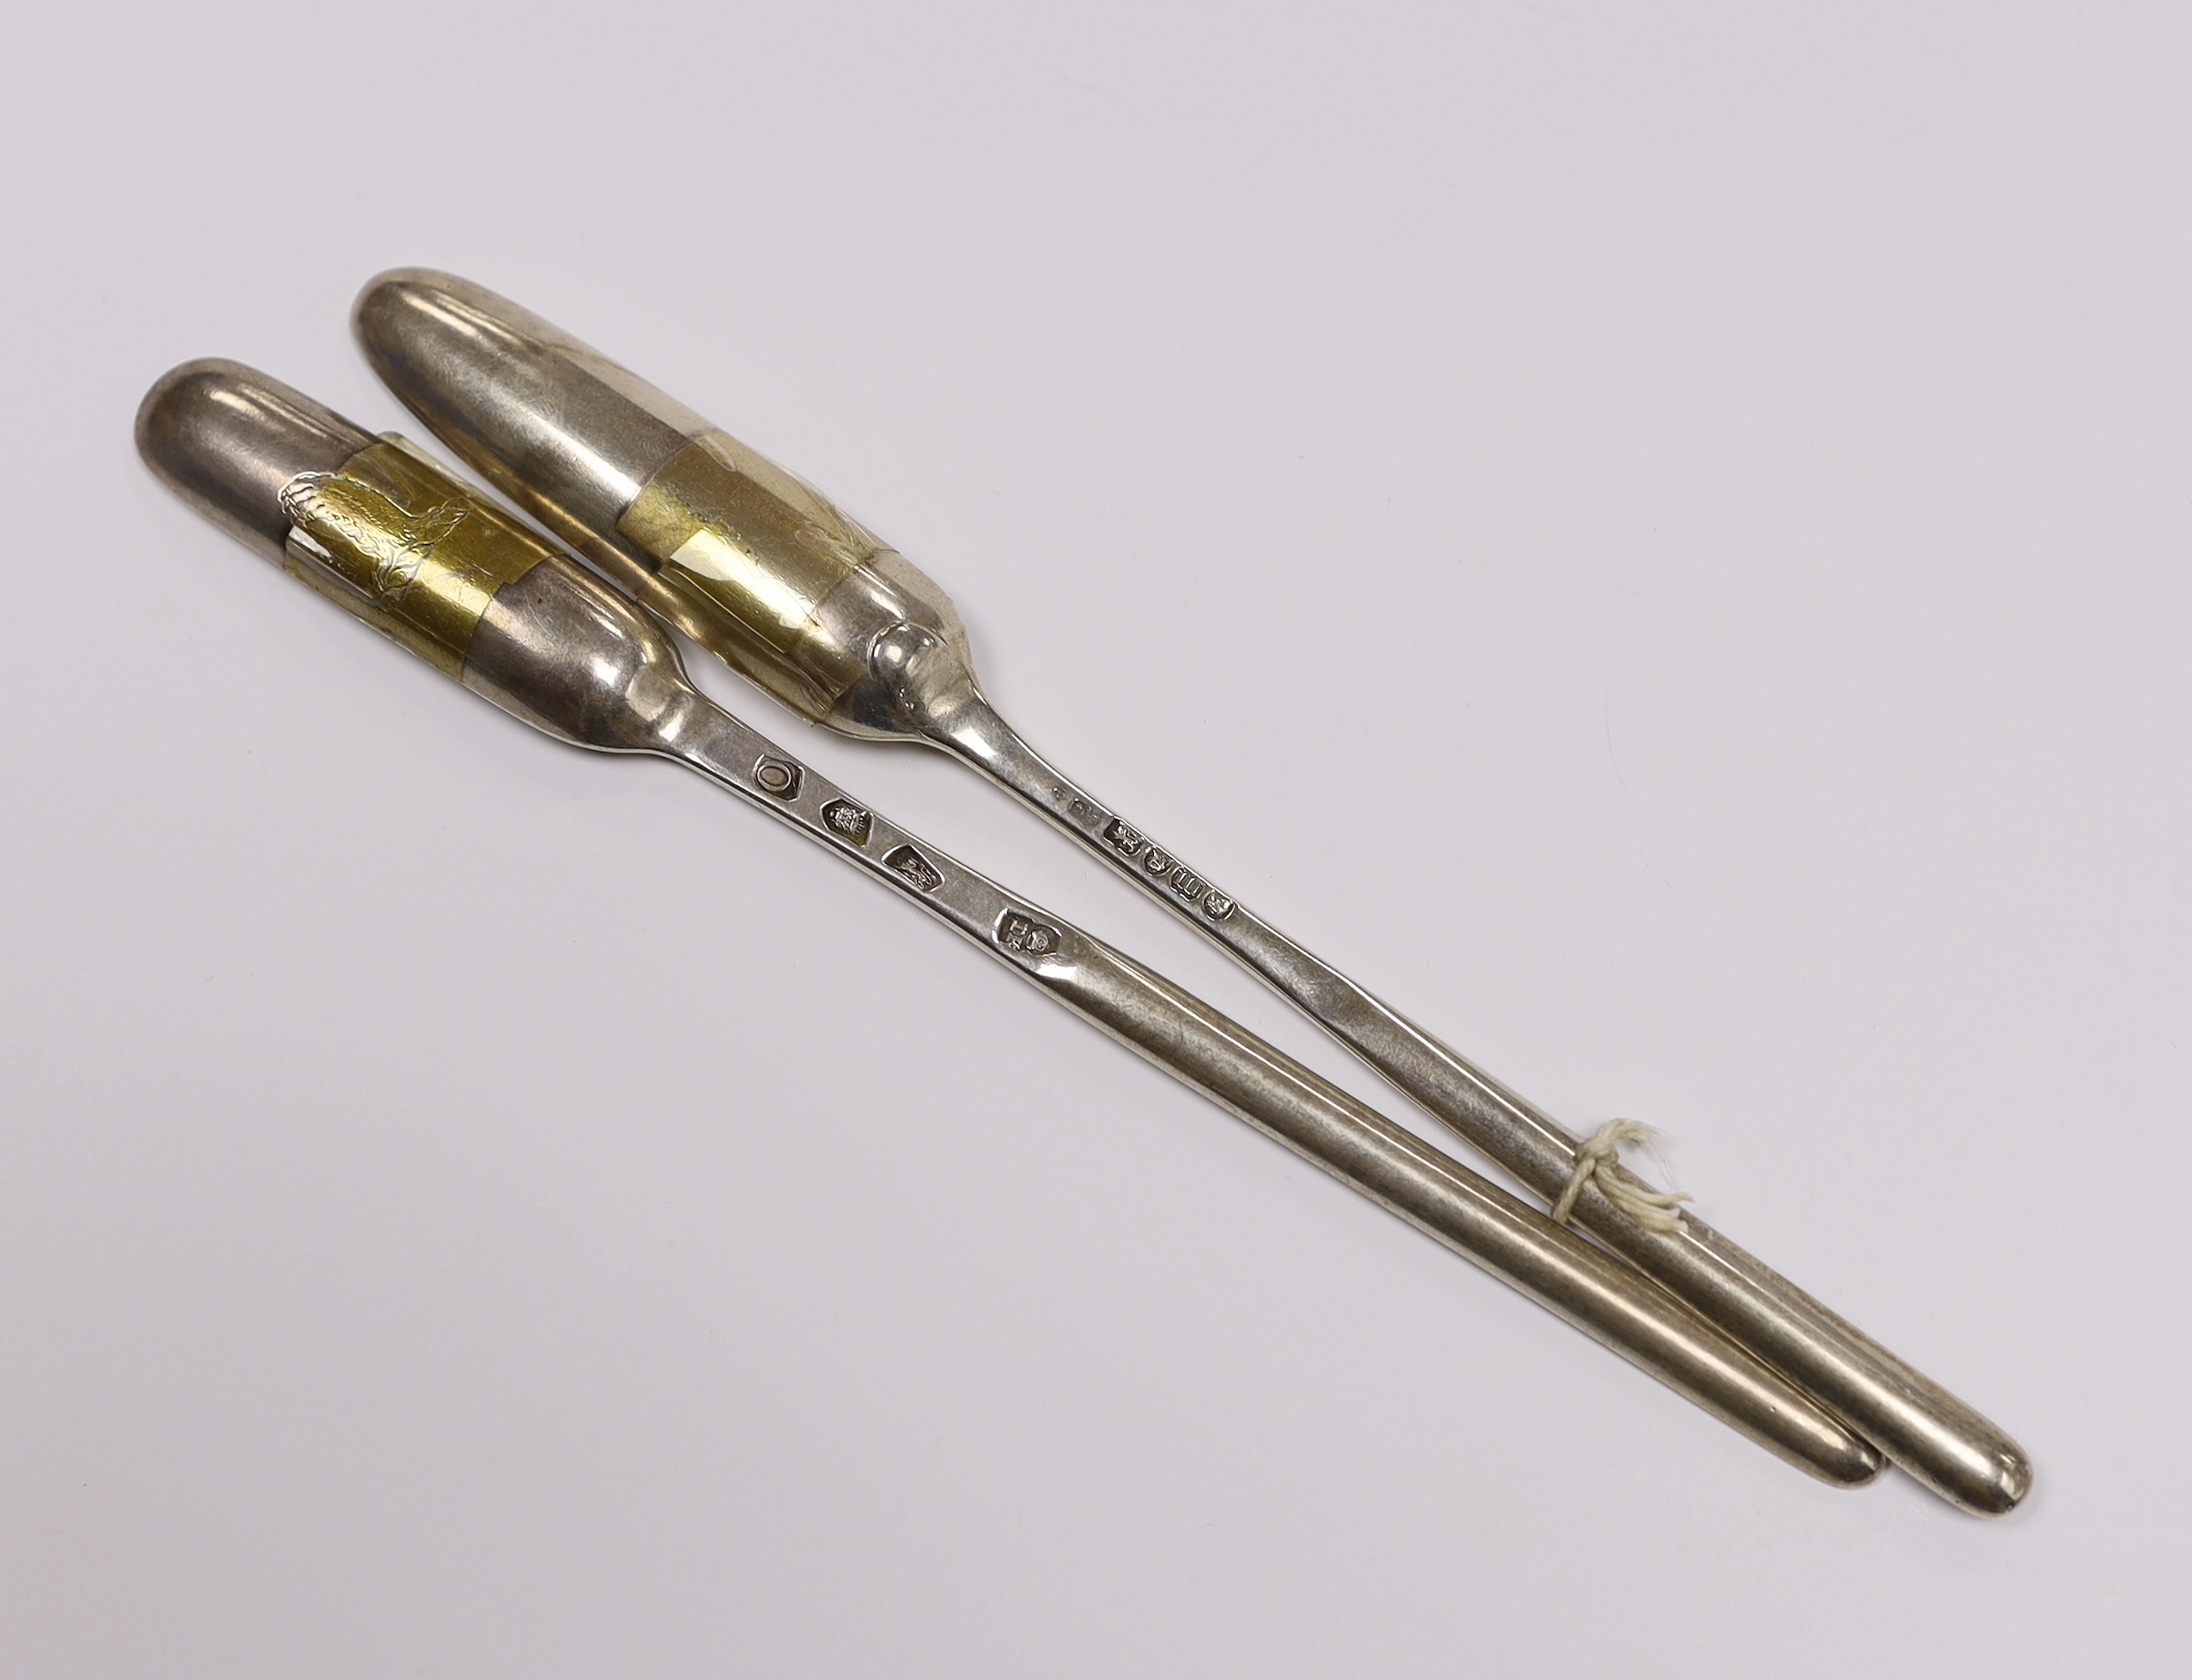 A George II silver marrow scoop, by Jeremiah King, London, 1729 and one other later silver marrow scoop, London, 1787, both approx. 22.7cm, 97 grams.